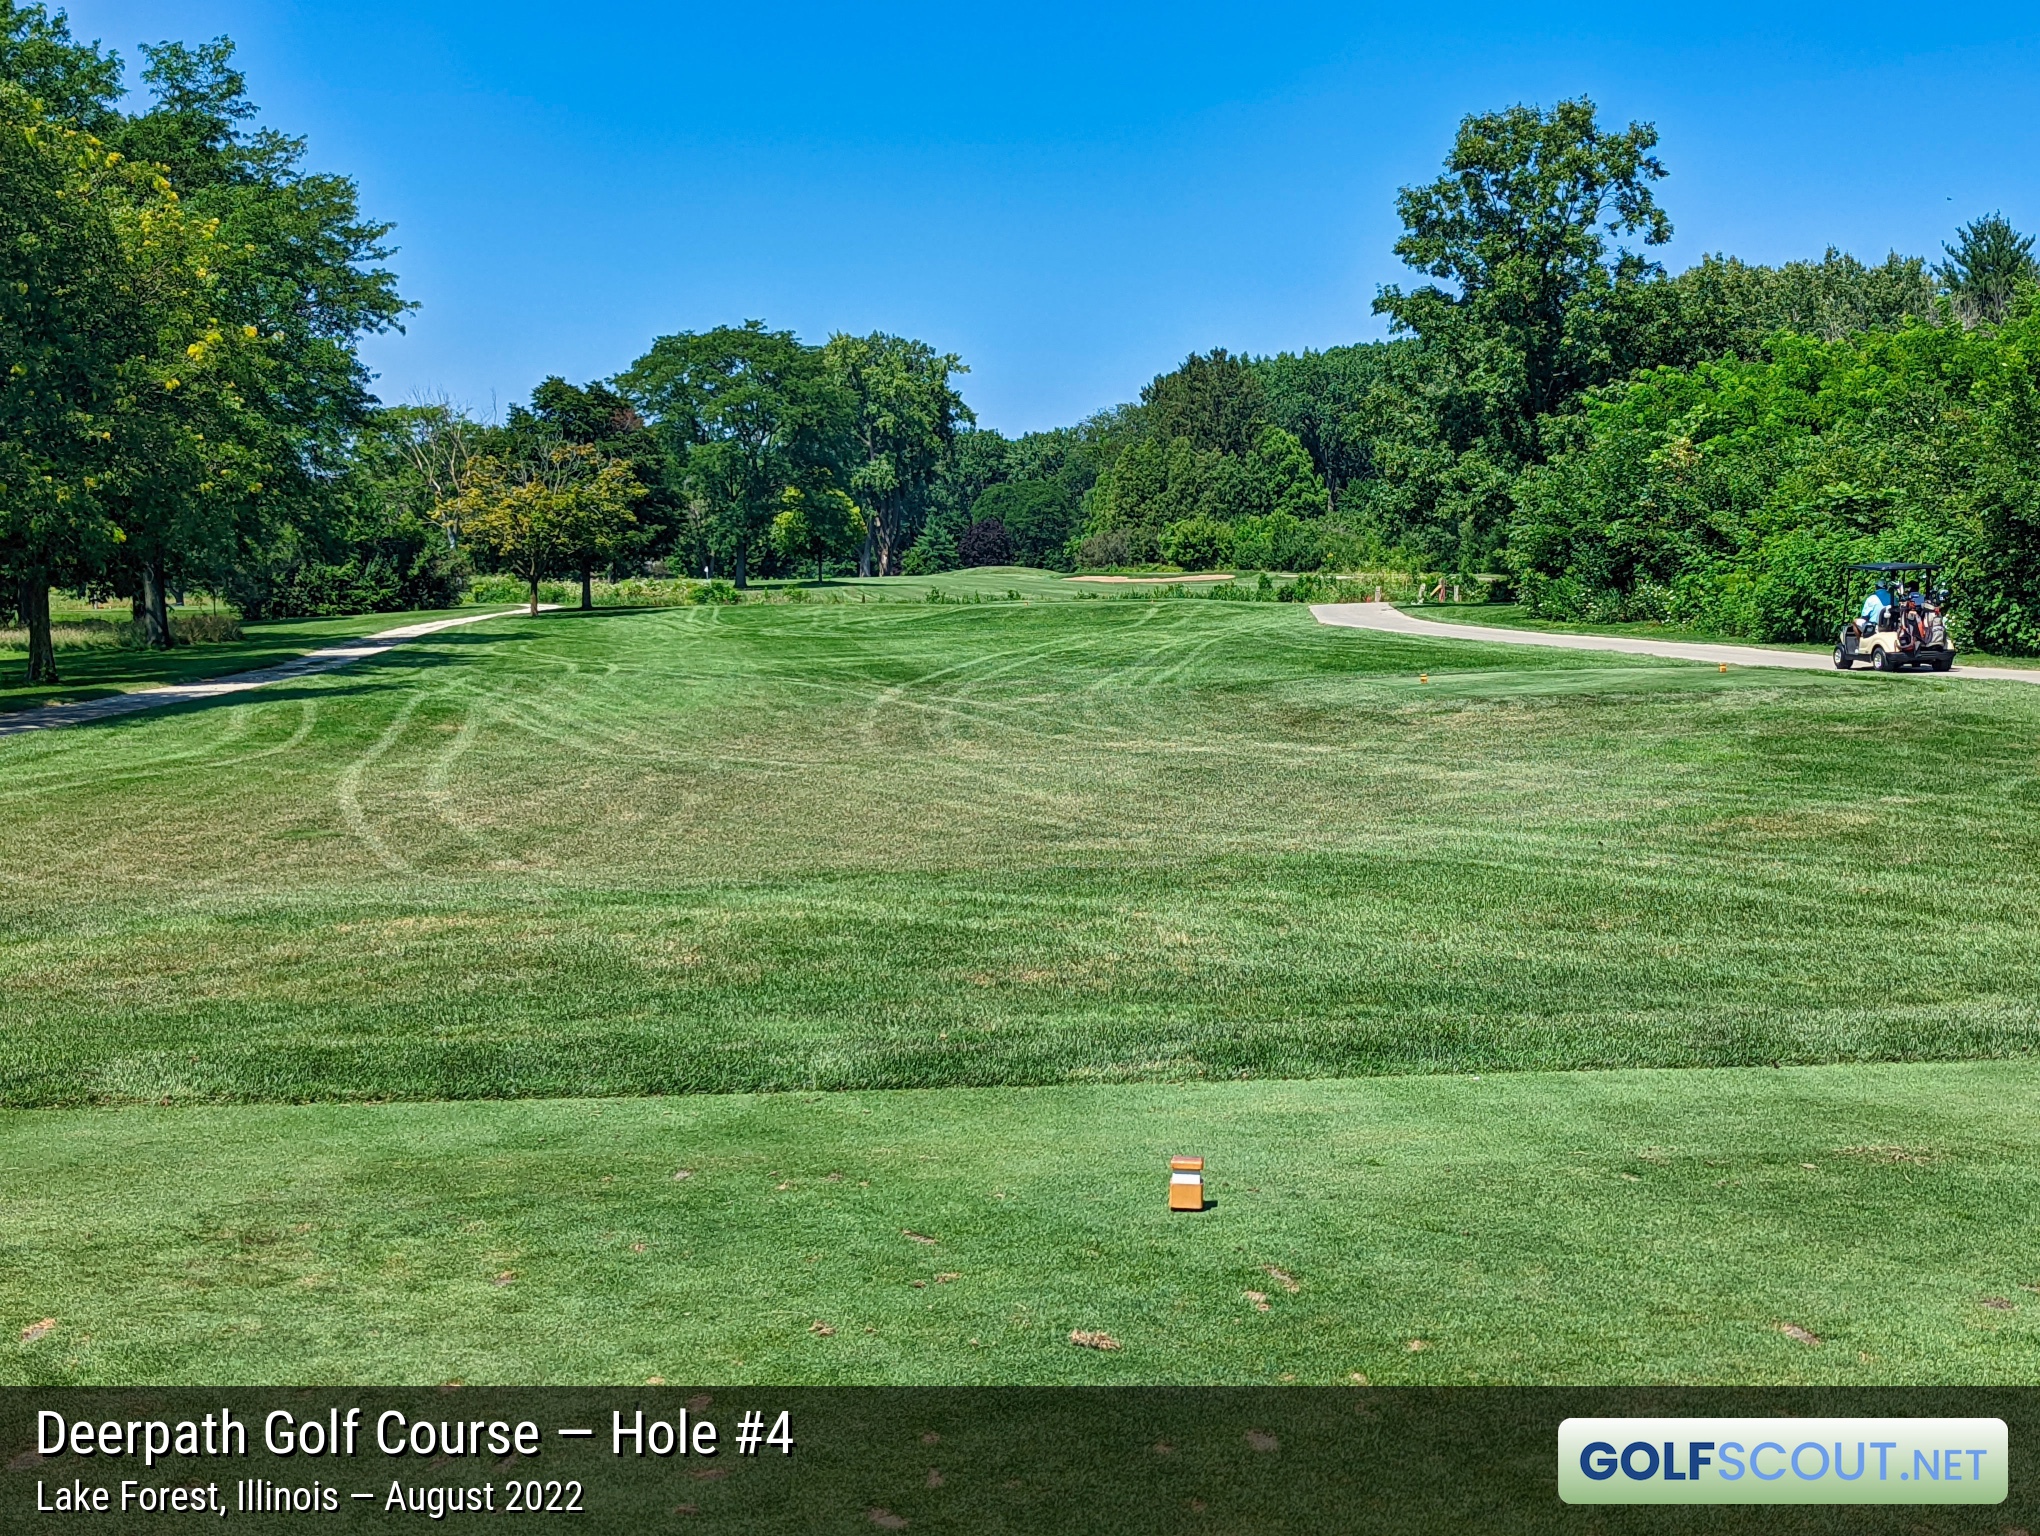 Photo of hole #4 at Deerpath Golf Course in Lake Forest, Illinois. 